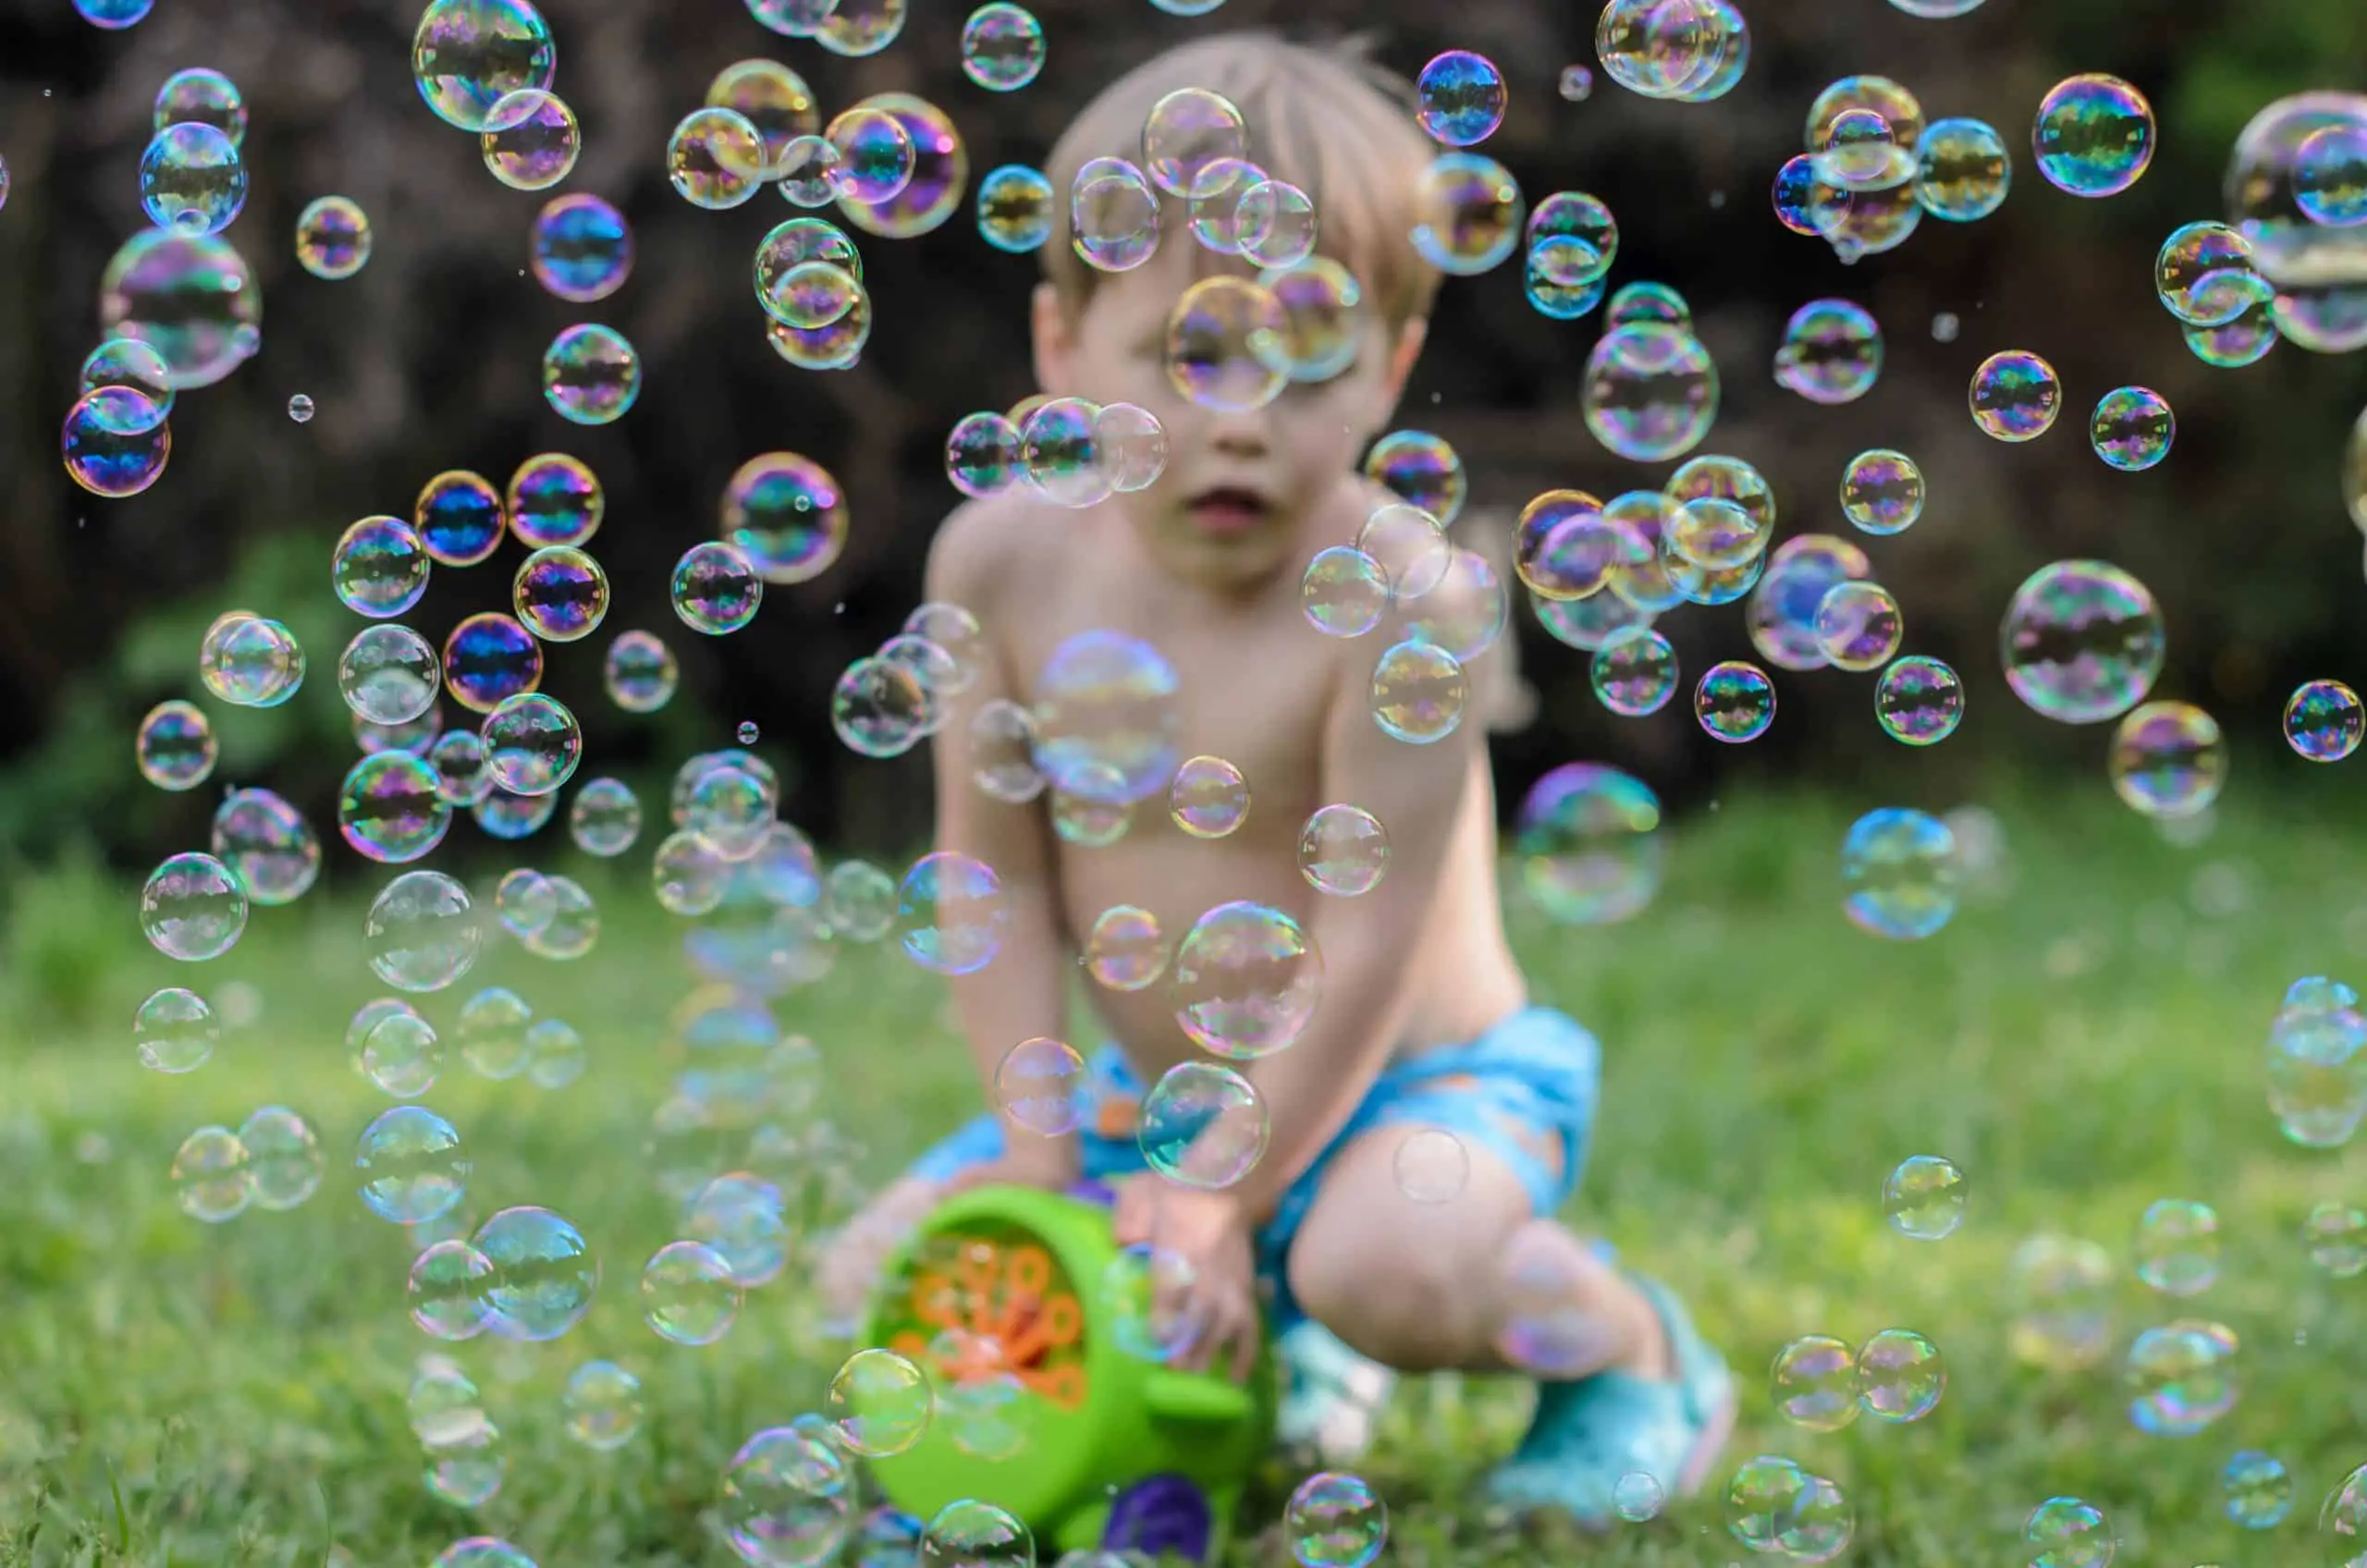 Blure boy plays with soap bubbles maker machine in the courtyard